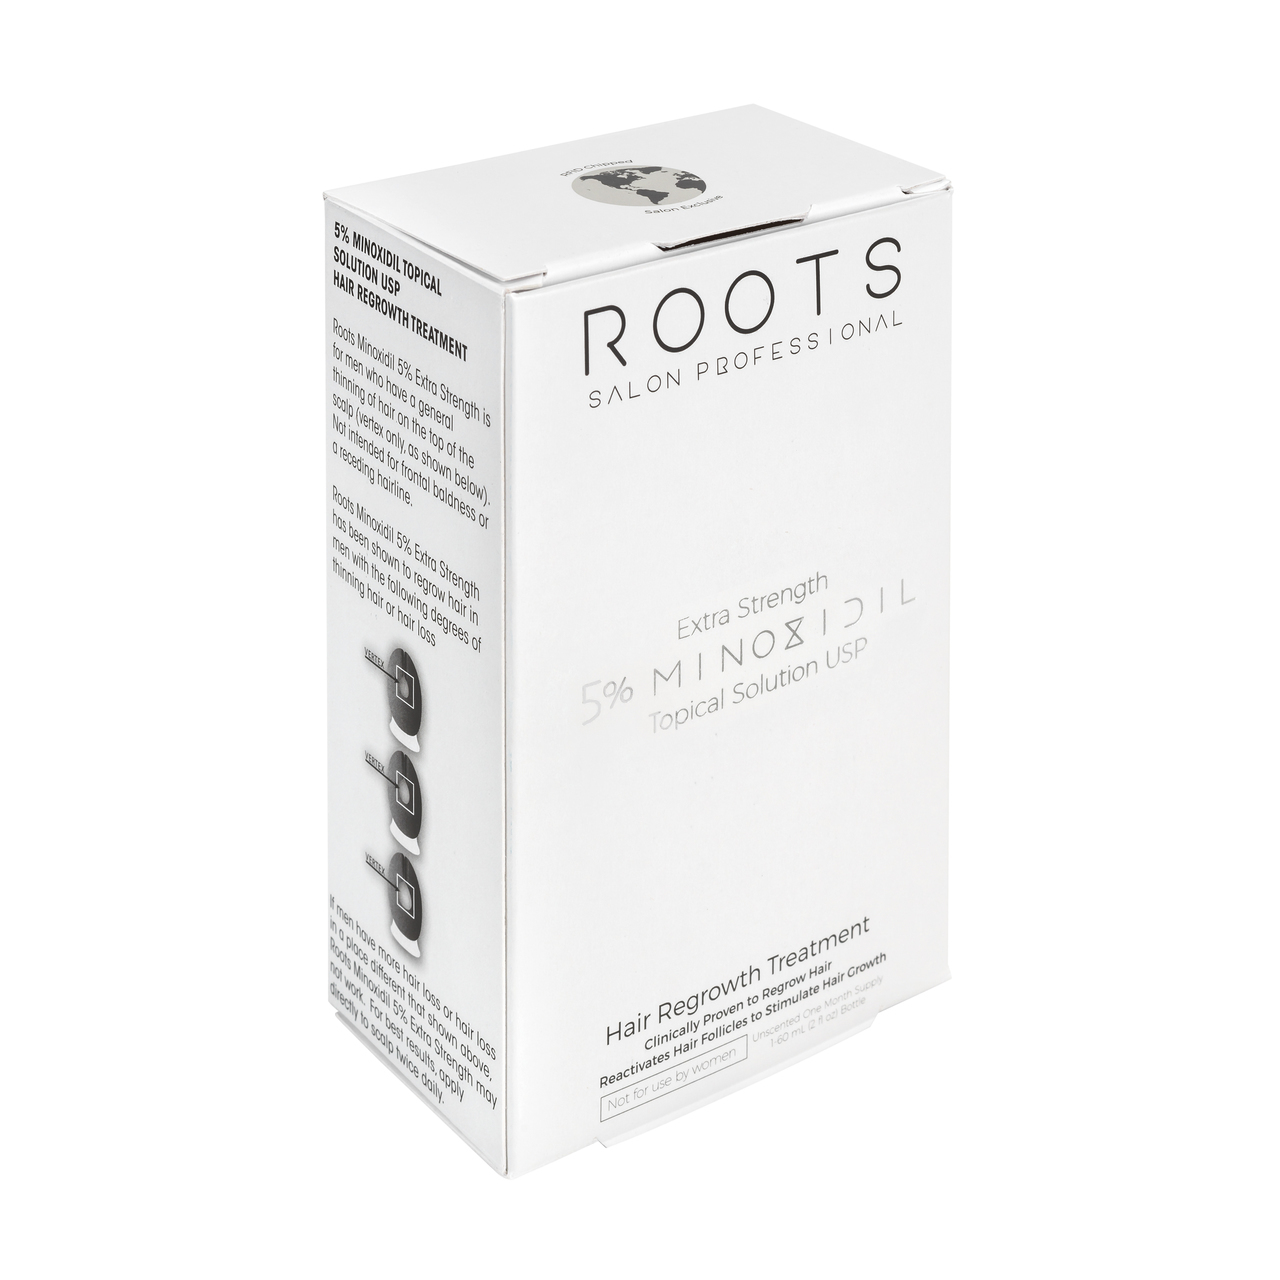 Roots Professional Extra Strength 5 Minoxidil Topical Solution 2oz